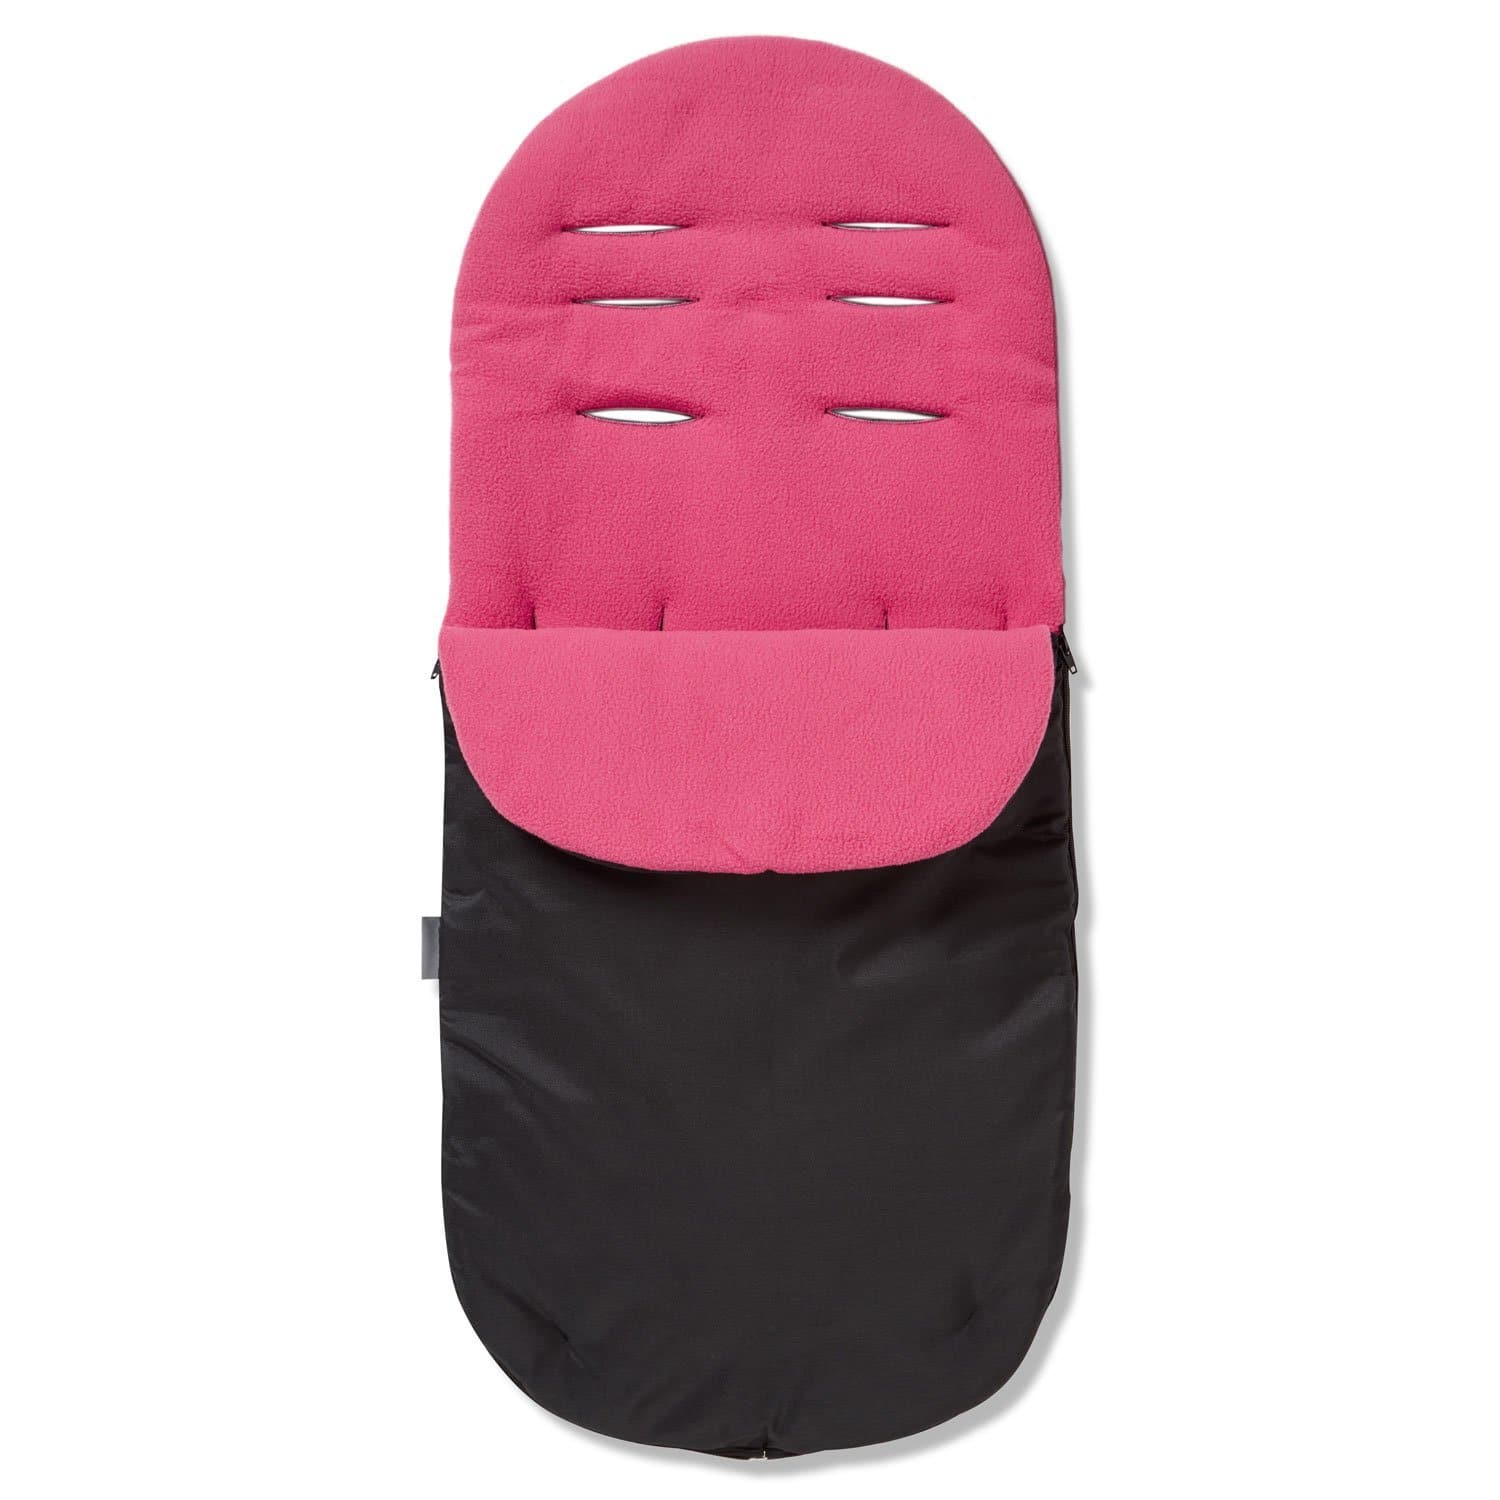 Footmuff / Cosy Toes Compatible with Babybus - For Your Little One